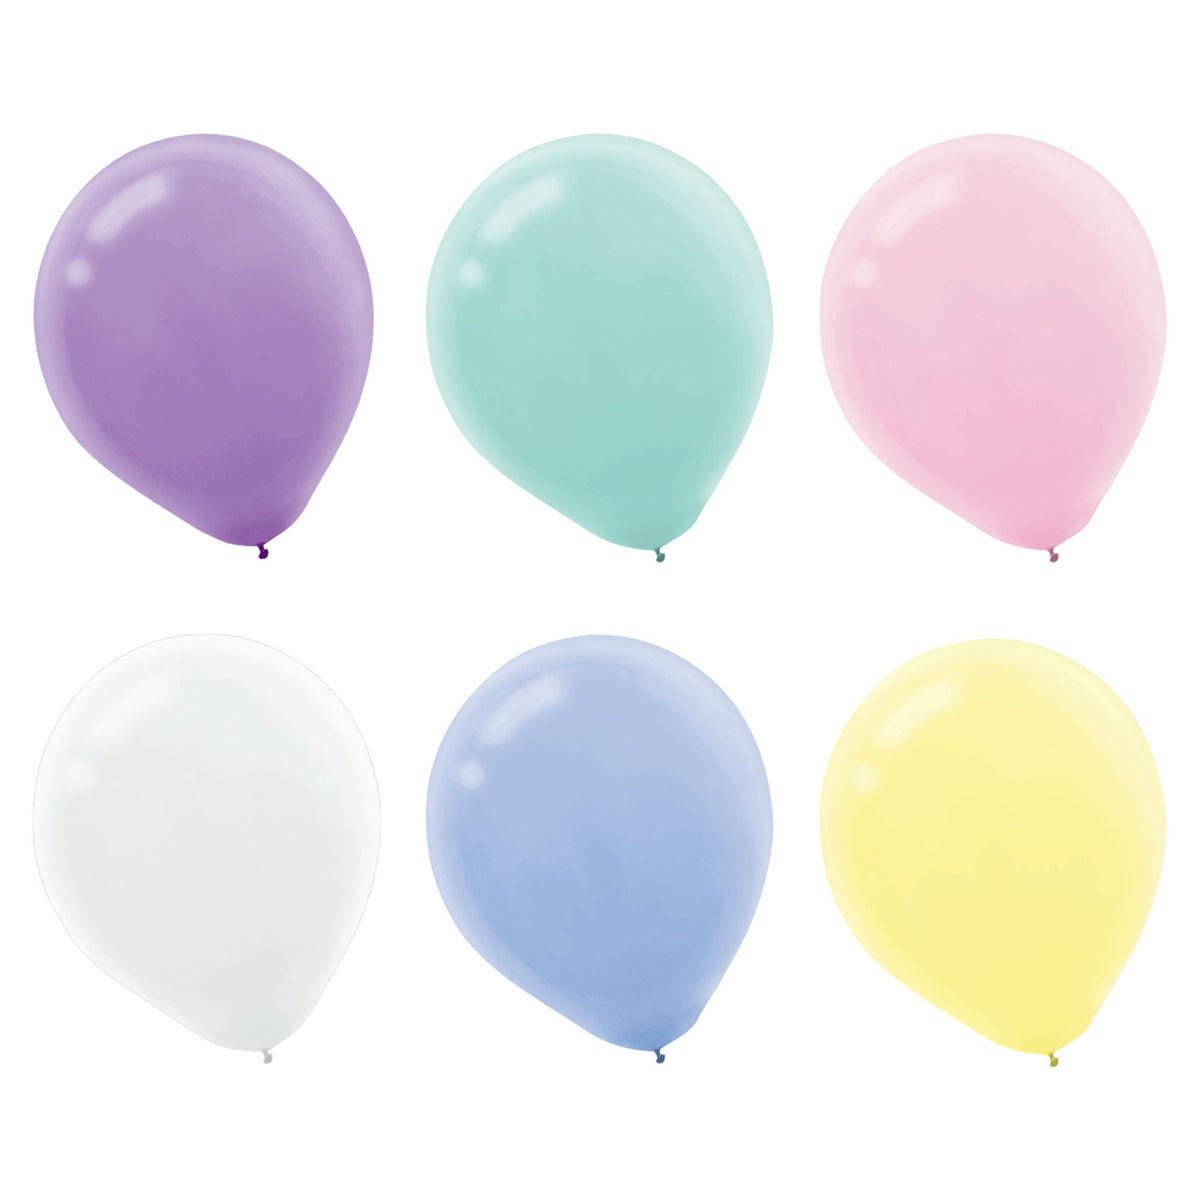 Assorted Pastel Solid Color 12" helium quality 15 count Latex Balloons